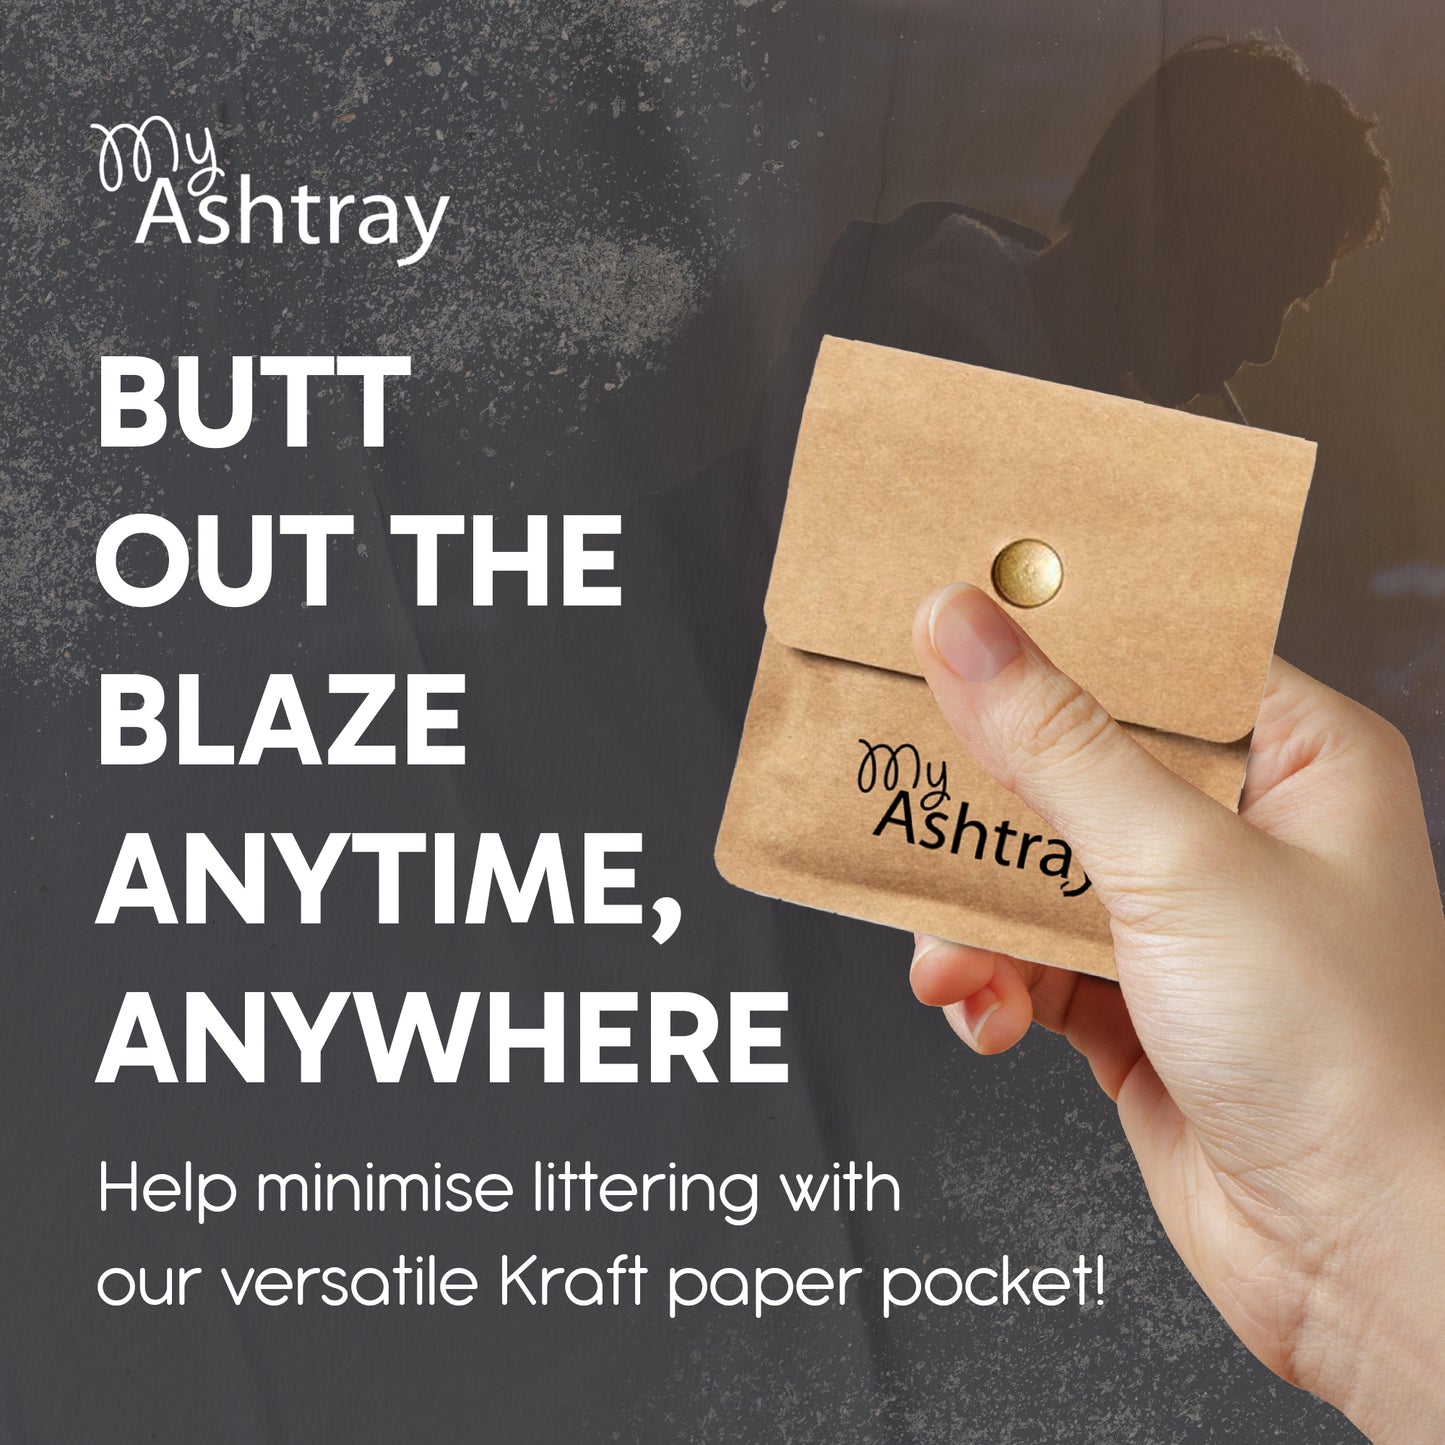 Portable Pocket Ashtray - Smell Proof Kraft Paper Small Popper Wallets w/Sturdy Metal Button, Fireproof Lining, Aluminium Foil, Thermal Foam - Kraft Paper Pouch